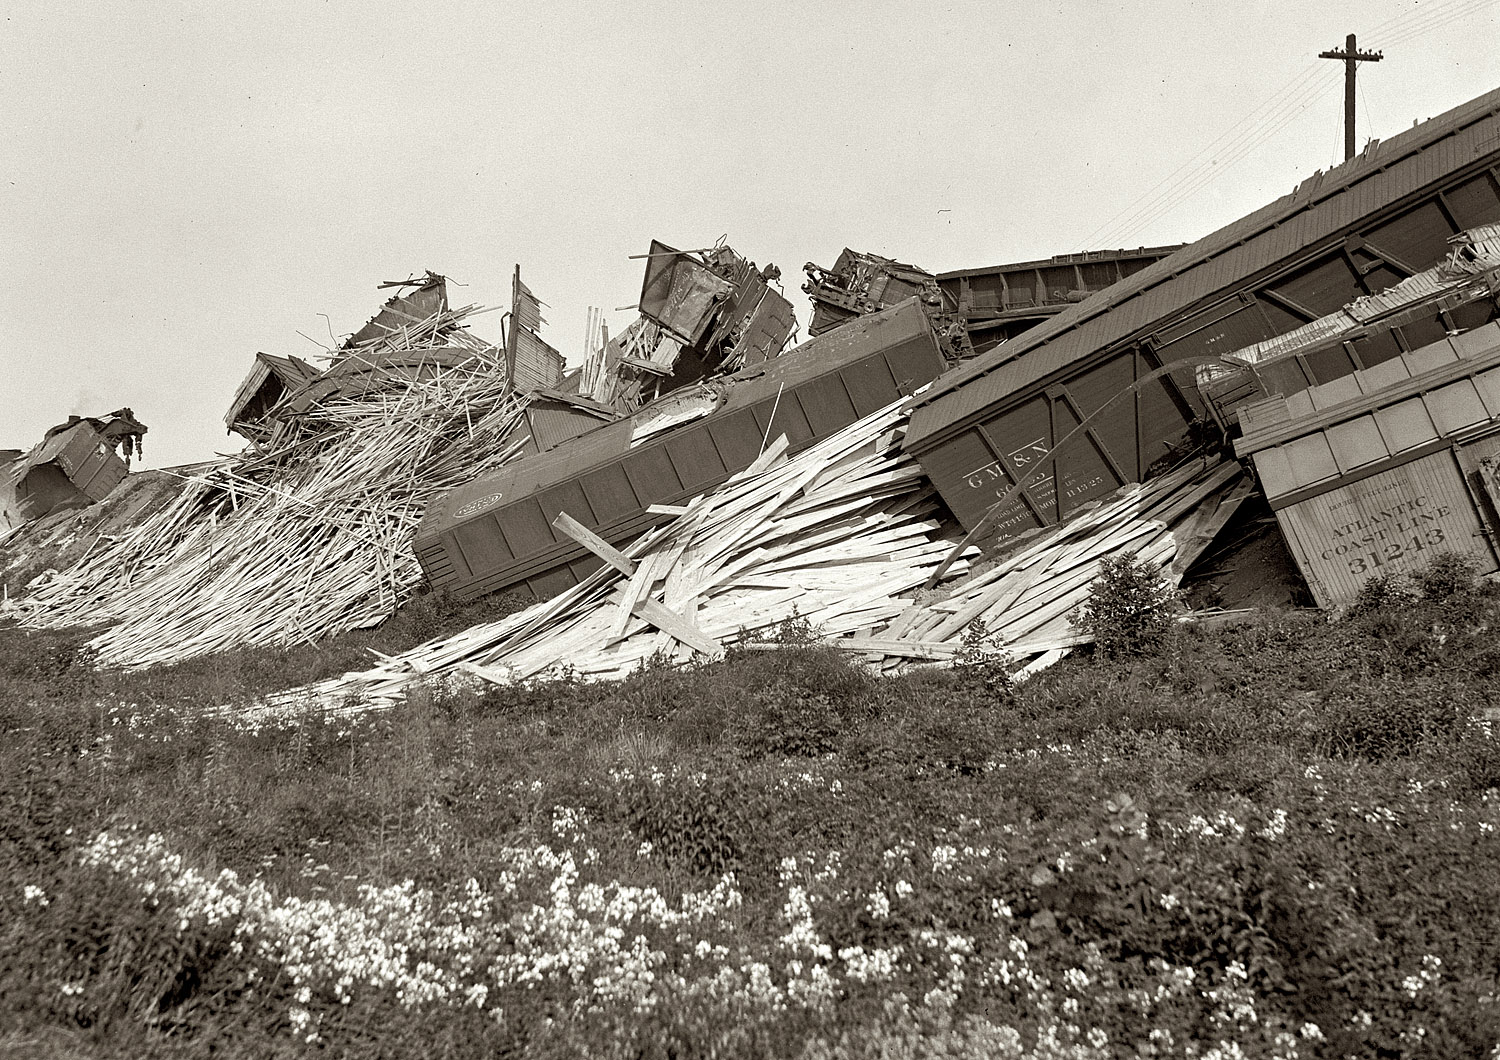 July 20, 1926. Another view of the train wreck at Cameron Run, near Alexandria, Virginia. View full size. National Photo Company Collection glass negative.